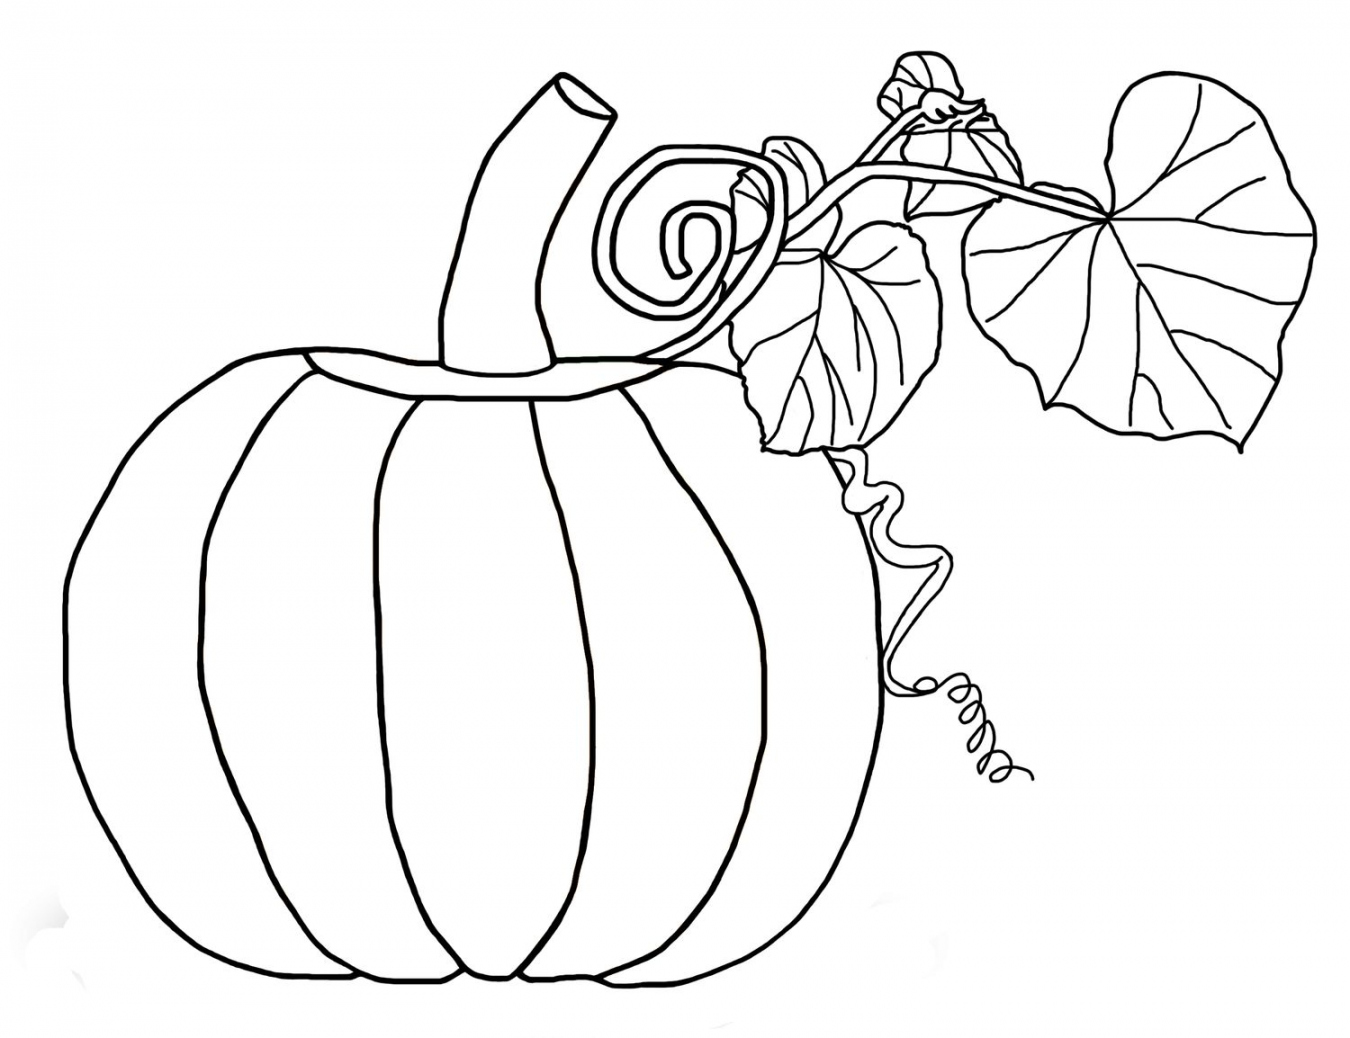 Free Pumpkin Coloring Pages for Kids - FREE Printables - Free Printable Pumpkin Coloring Pages